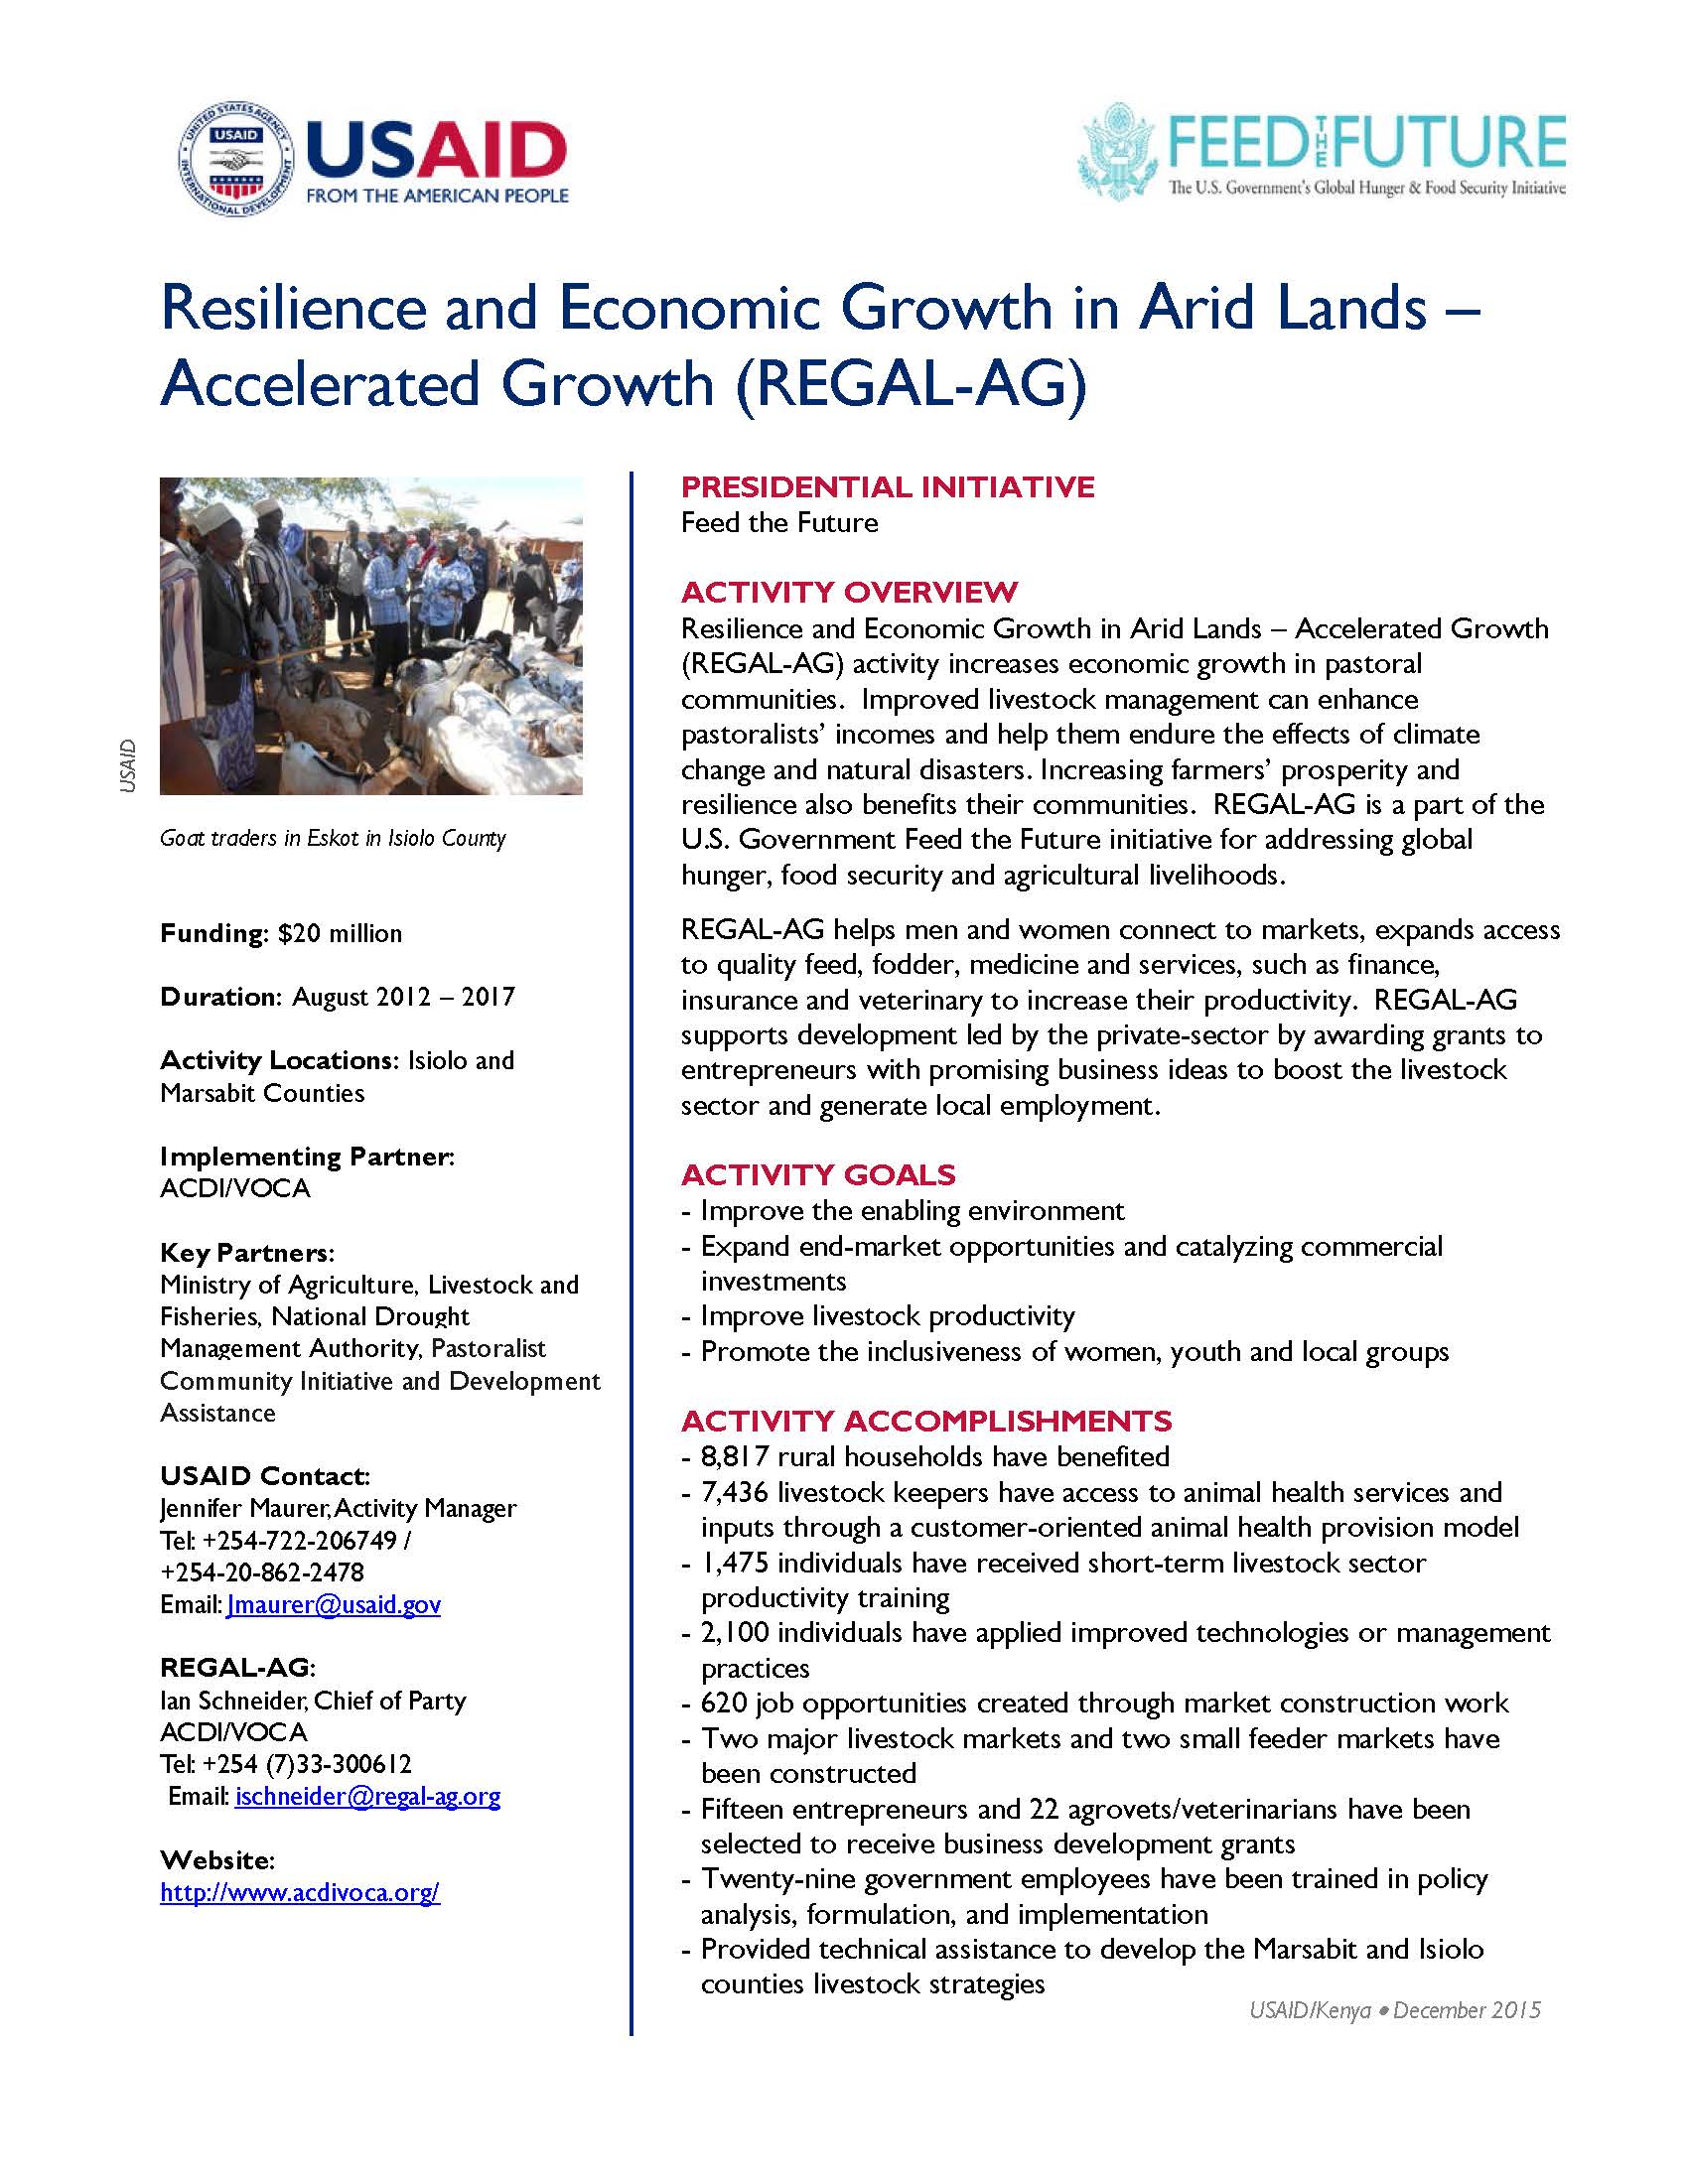 Resilience and Economic Growth in Arid Lands – Accelerated Growth (REGAL-AG)